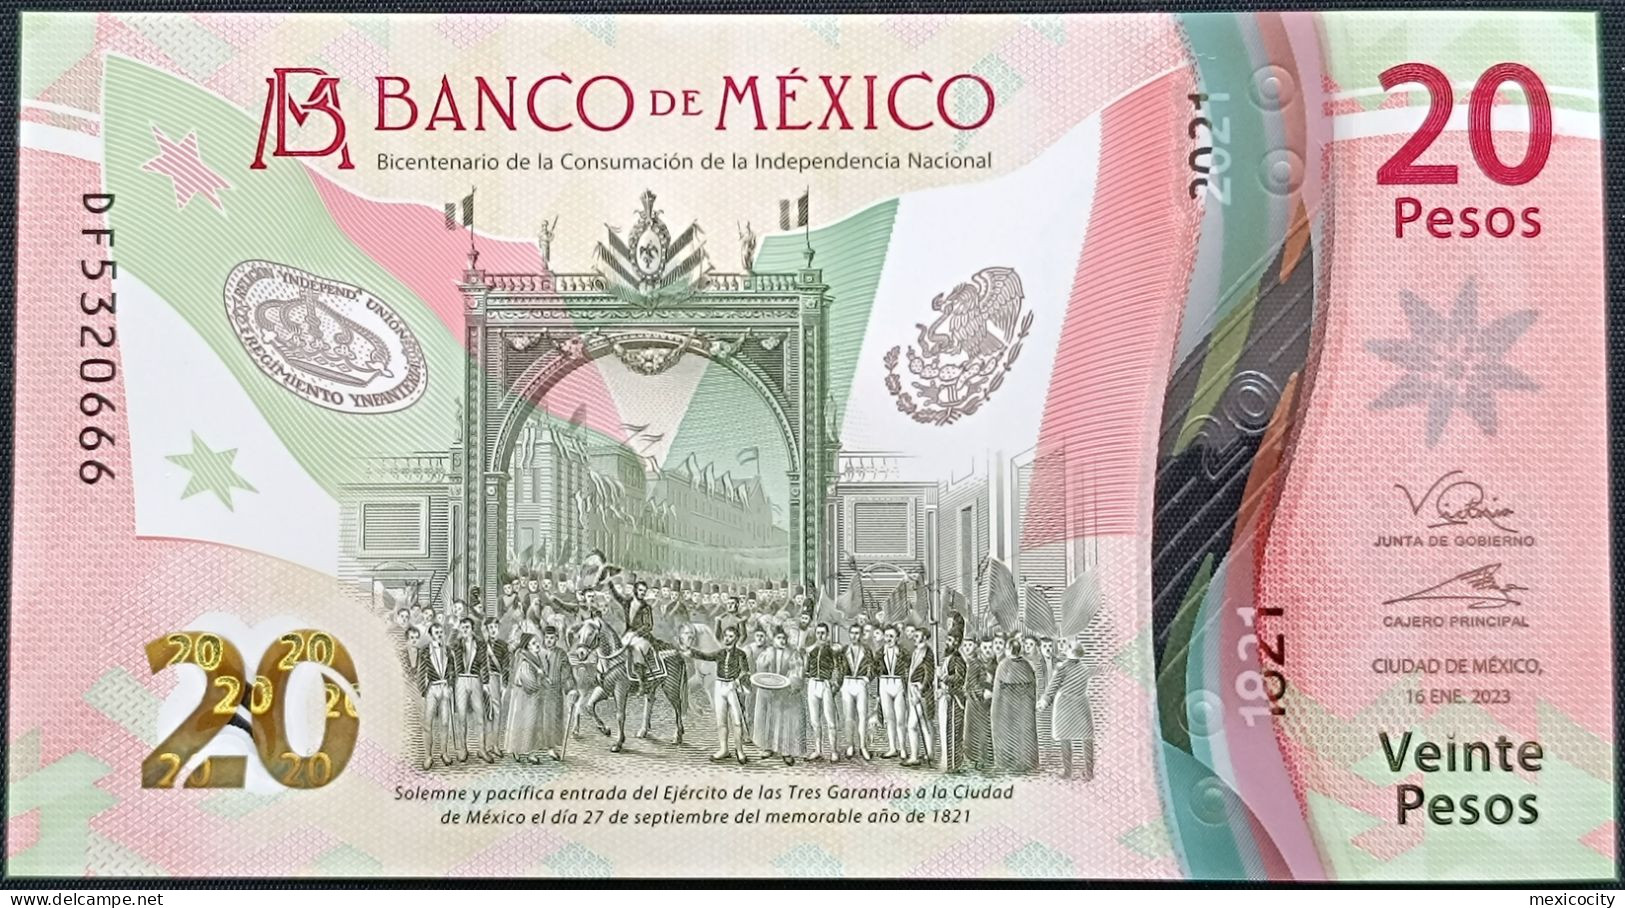 MEXICO $20 SERIES DF5320666 ANGEL # - 16-JAN-2023 INDEPENDENCE POLYMER NOTE BU Mint Crisp - Mexico